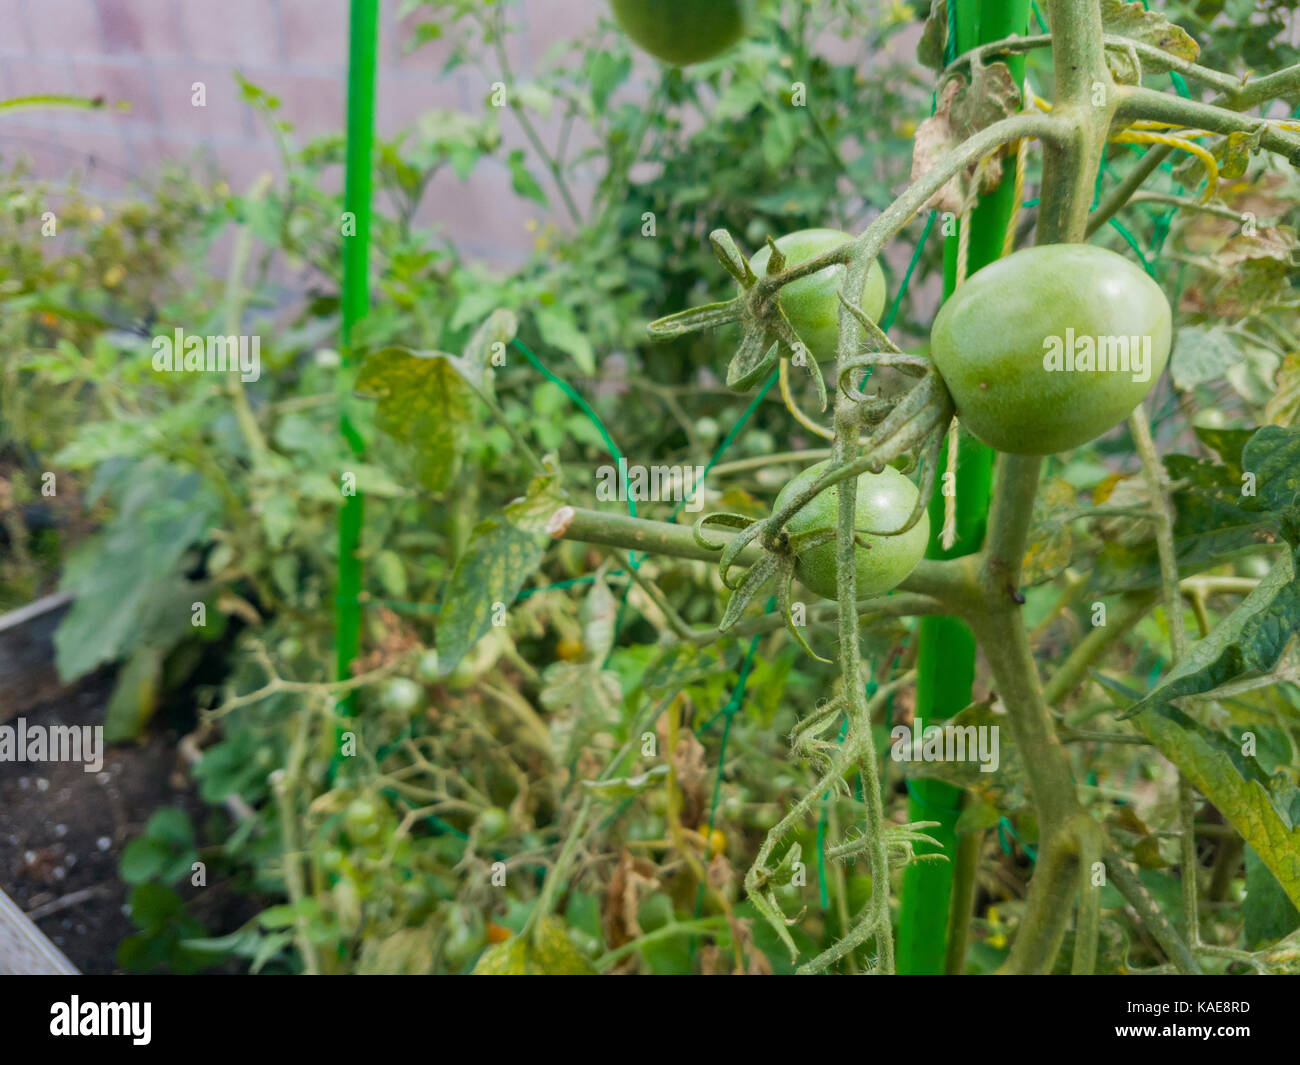 Growing tomato in home garden at Los Angeles Stock Photo